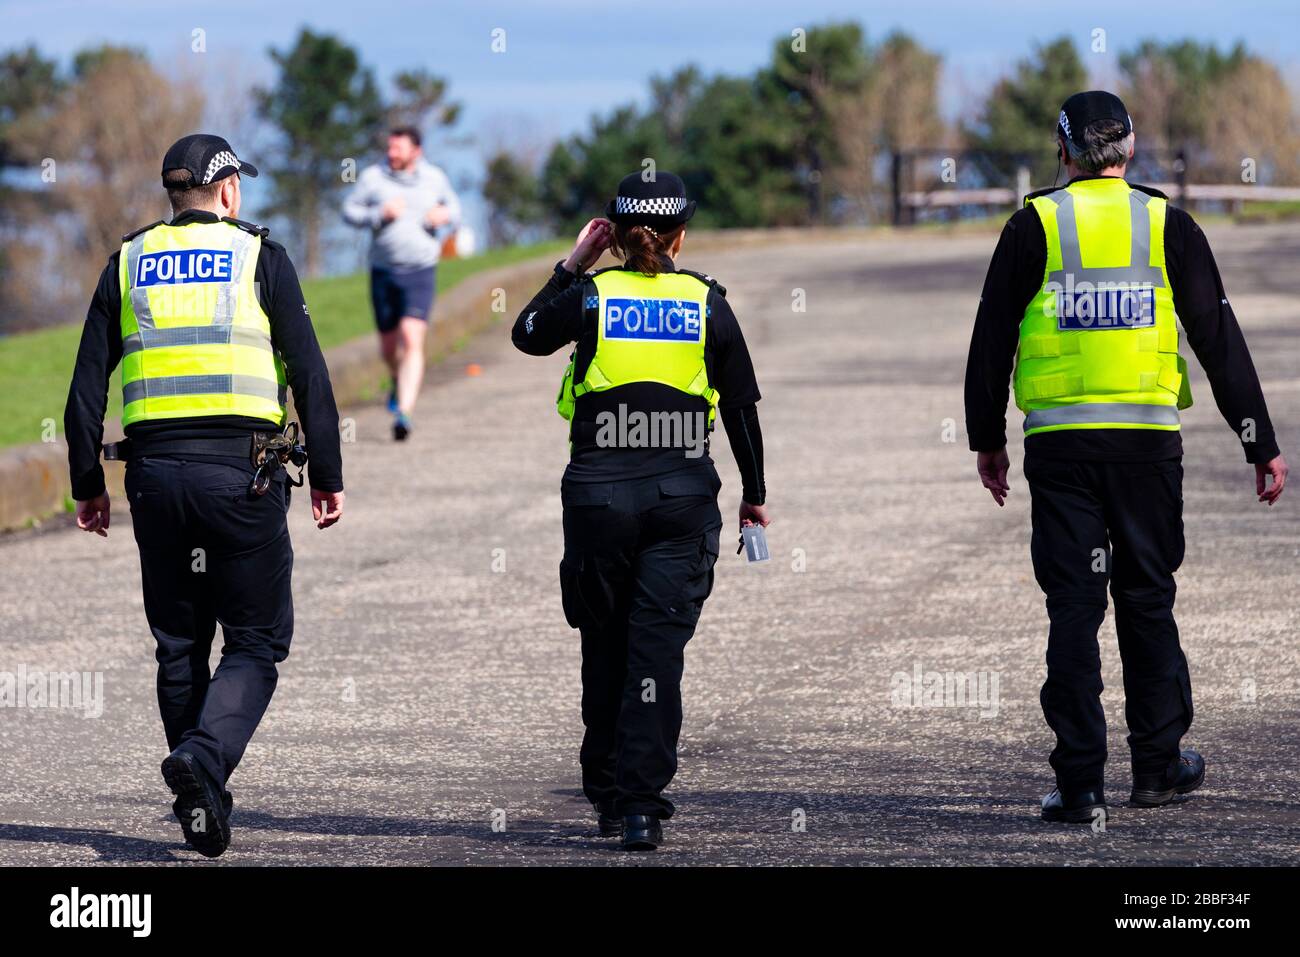 Edinburgh, Scotland, UK. 31 March, 2020. Police patrol public parks and walking areas to enforce the coronavirus lockdown regulations about being outdoor. Police patrol at Gypsy Brae recreation ground on waterfront. Iain Masterton/Alamy Live News Stock Photo